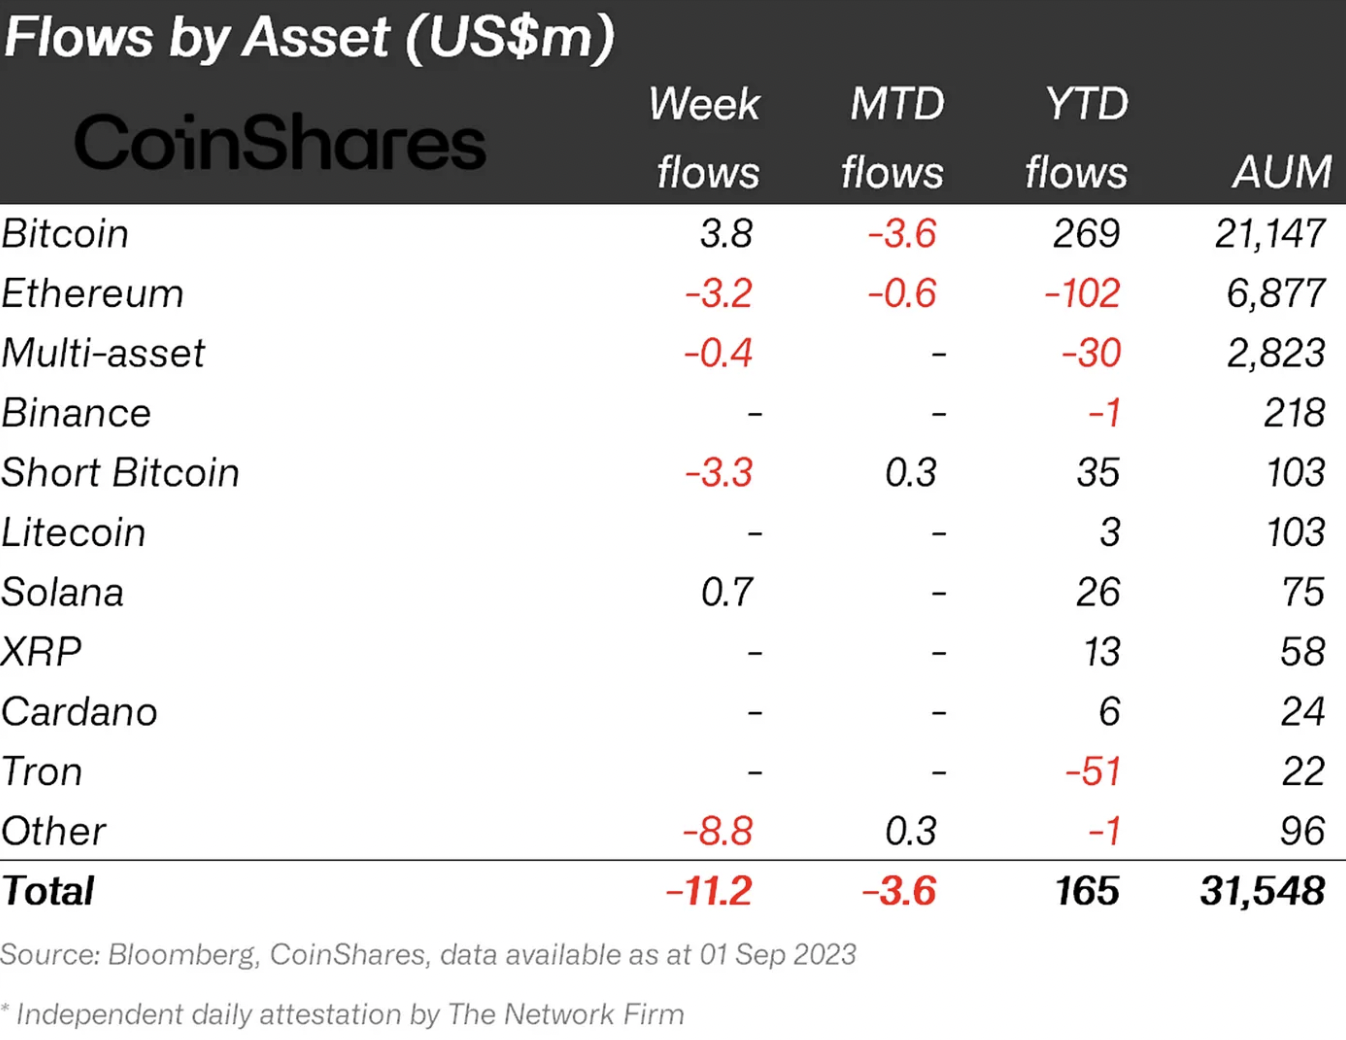 Capital flows by crypto assets (CoinShares report)